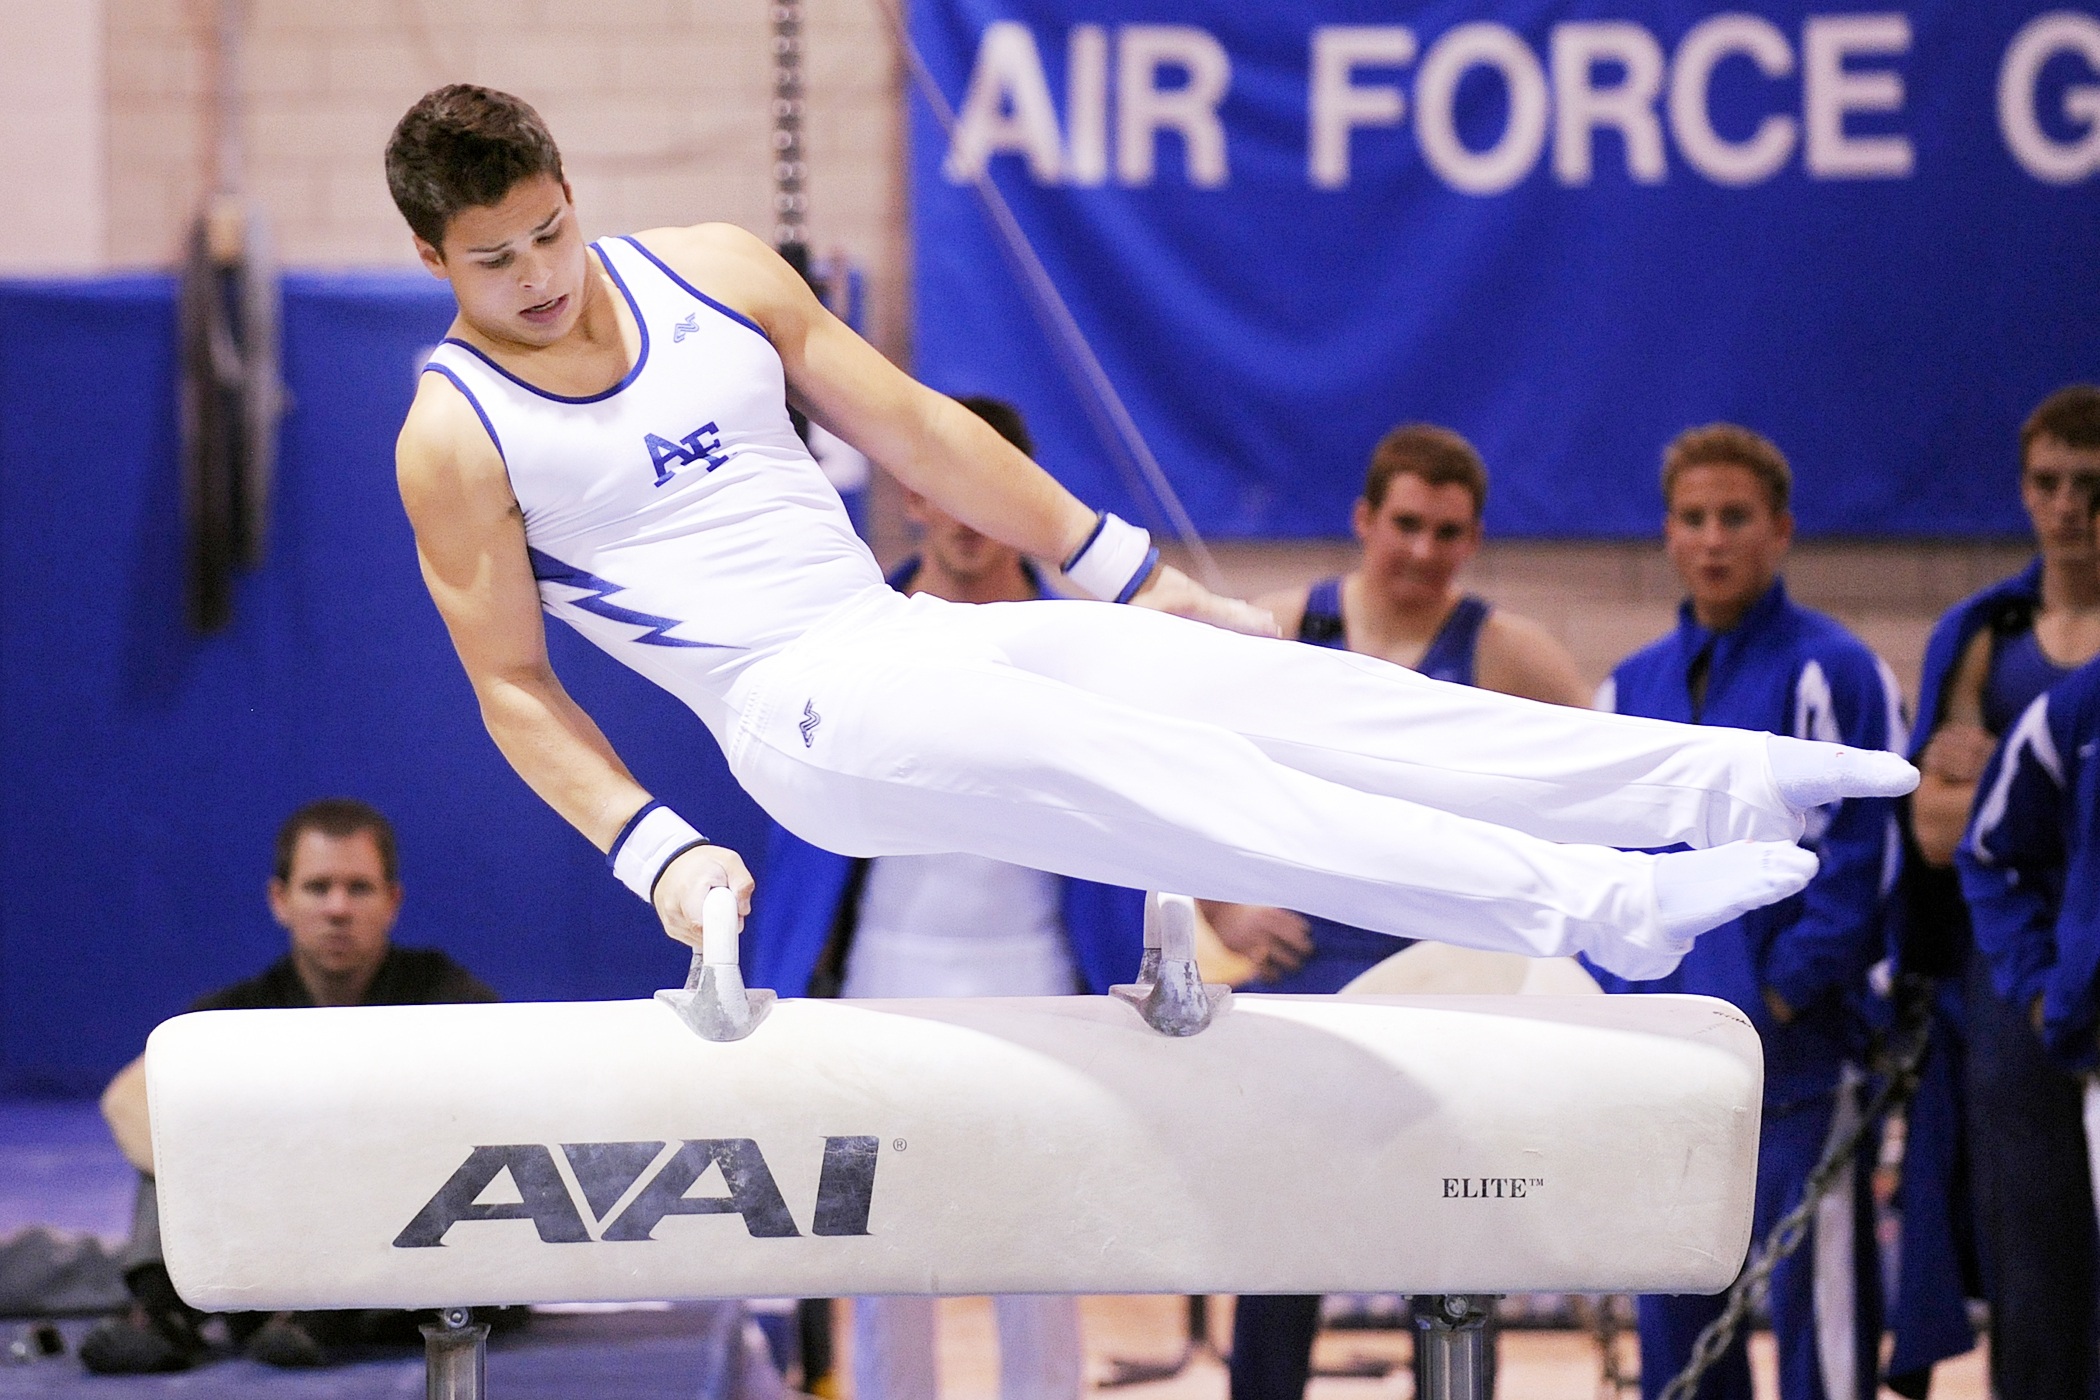 Male gymnasts from the air force on the pommel horse HD Wallpaper